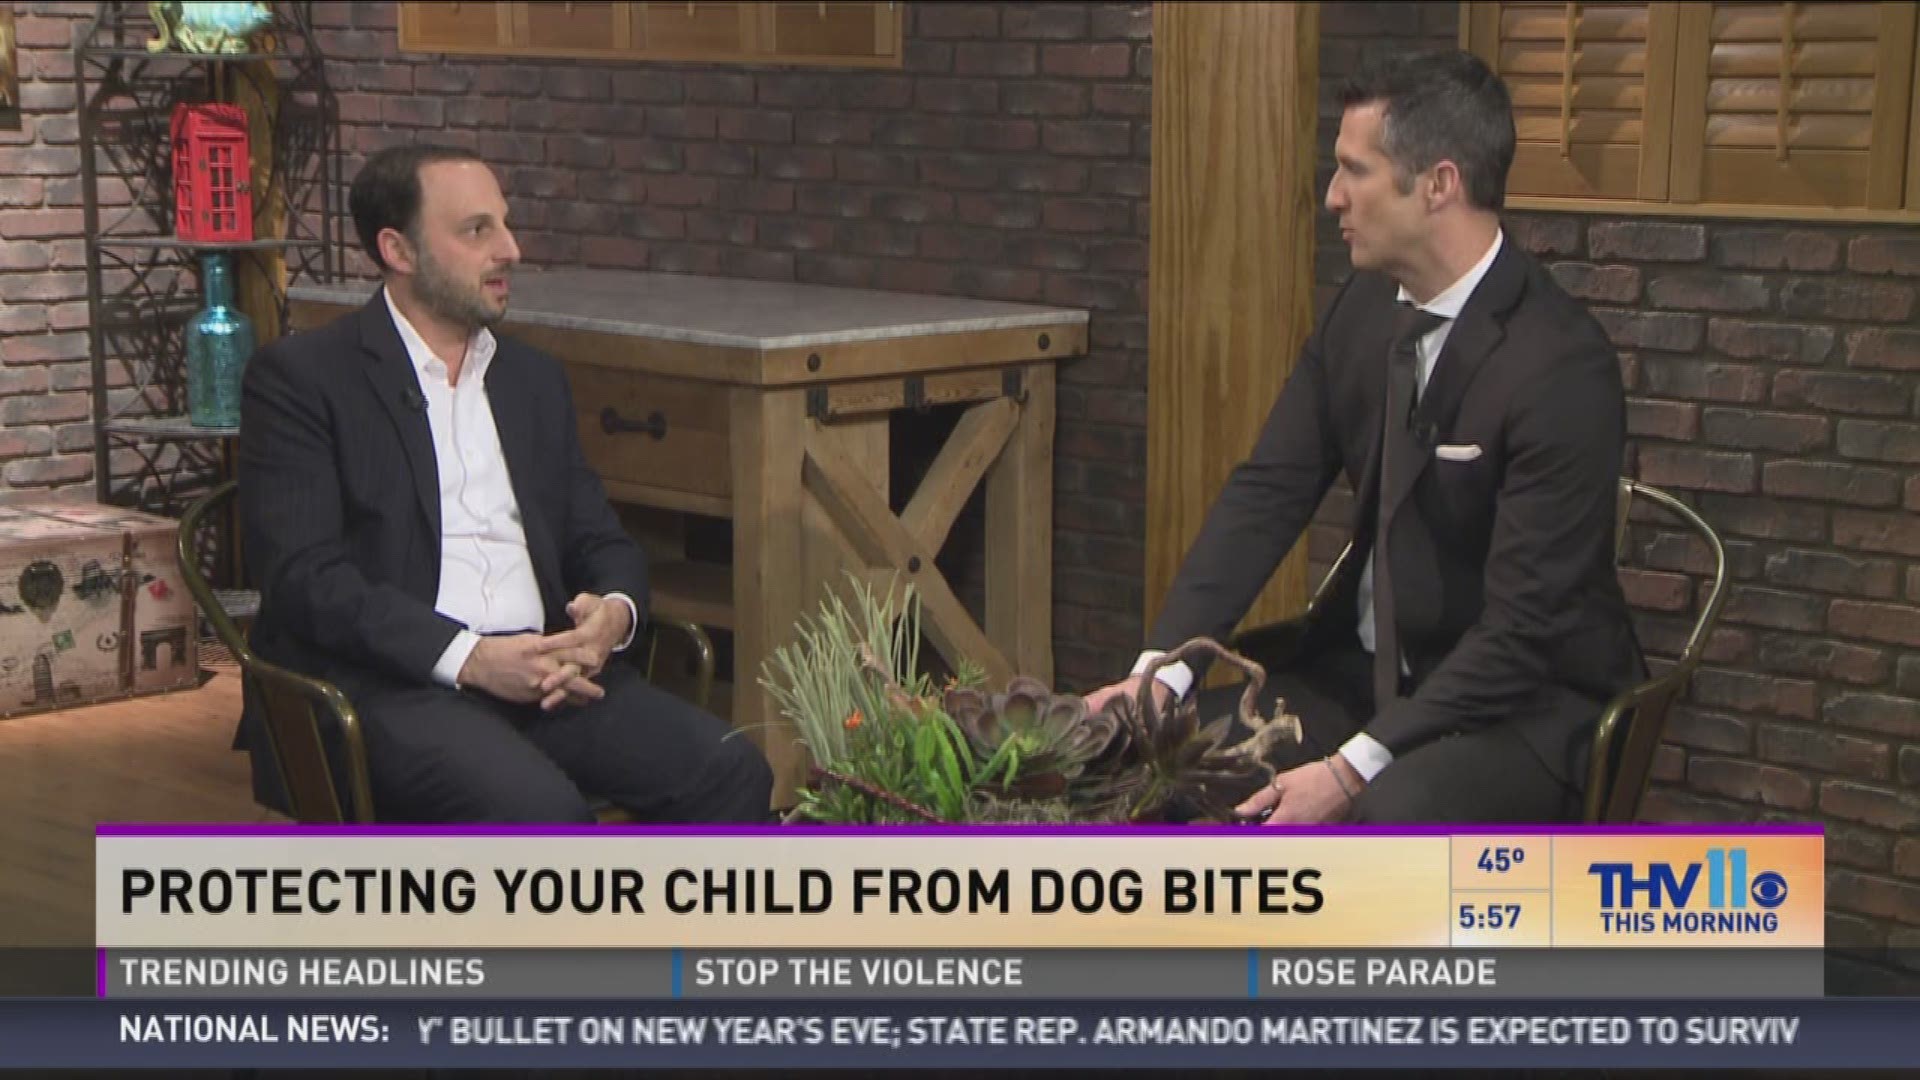 If you got a dog this Christmas, you should be aware that it takes time for some of these animals to get accustomed to your family, especially little kids. Dr. Michael Golinko, Medical Director of Arkansas Children's Hospital Craniofacial Program joined u